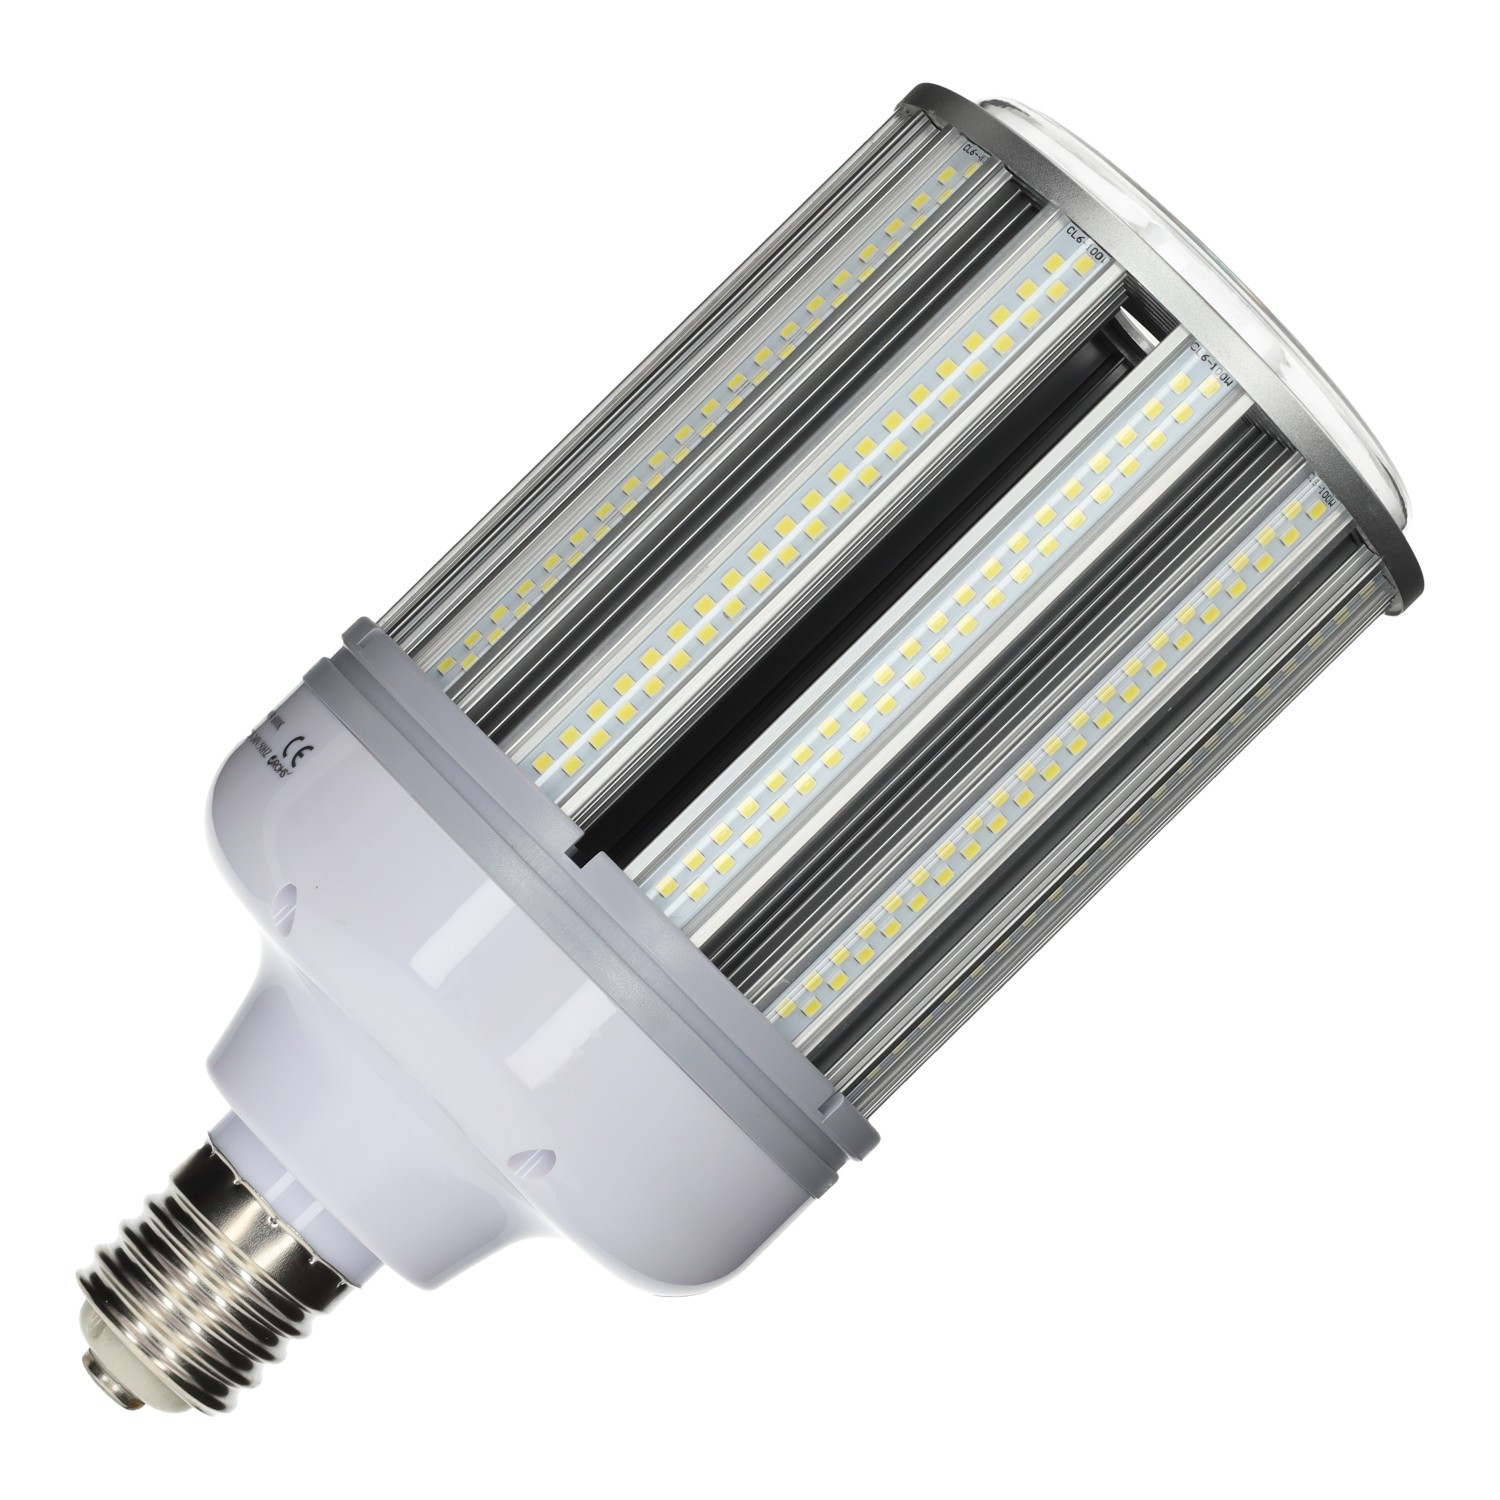 Lampione stradale a led 100W Serie Professional